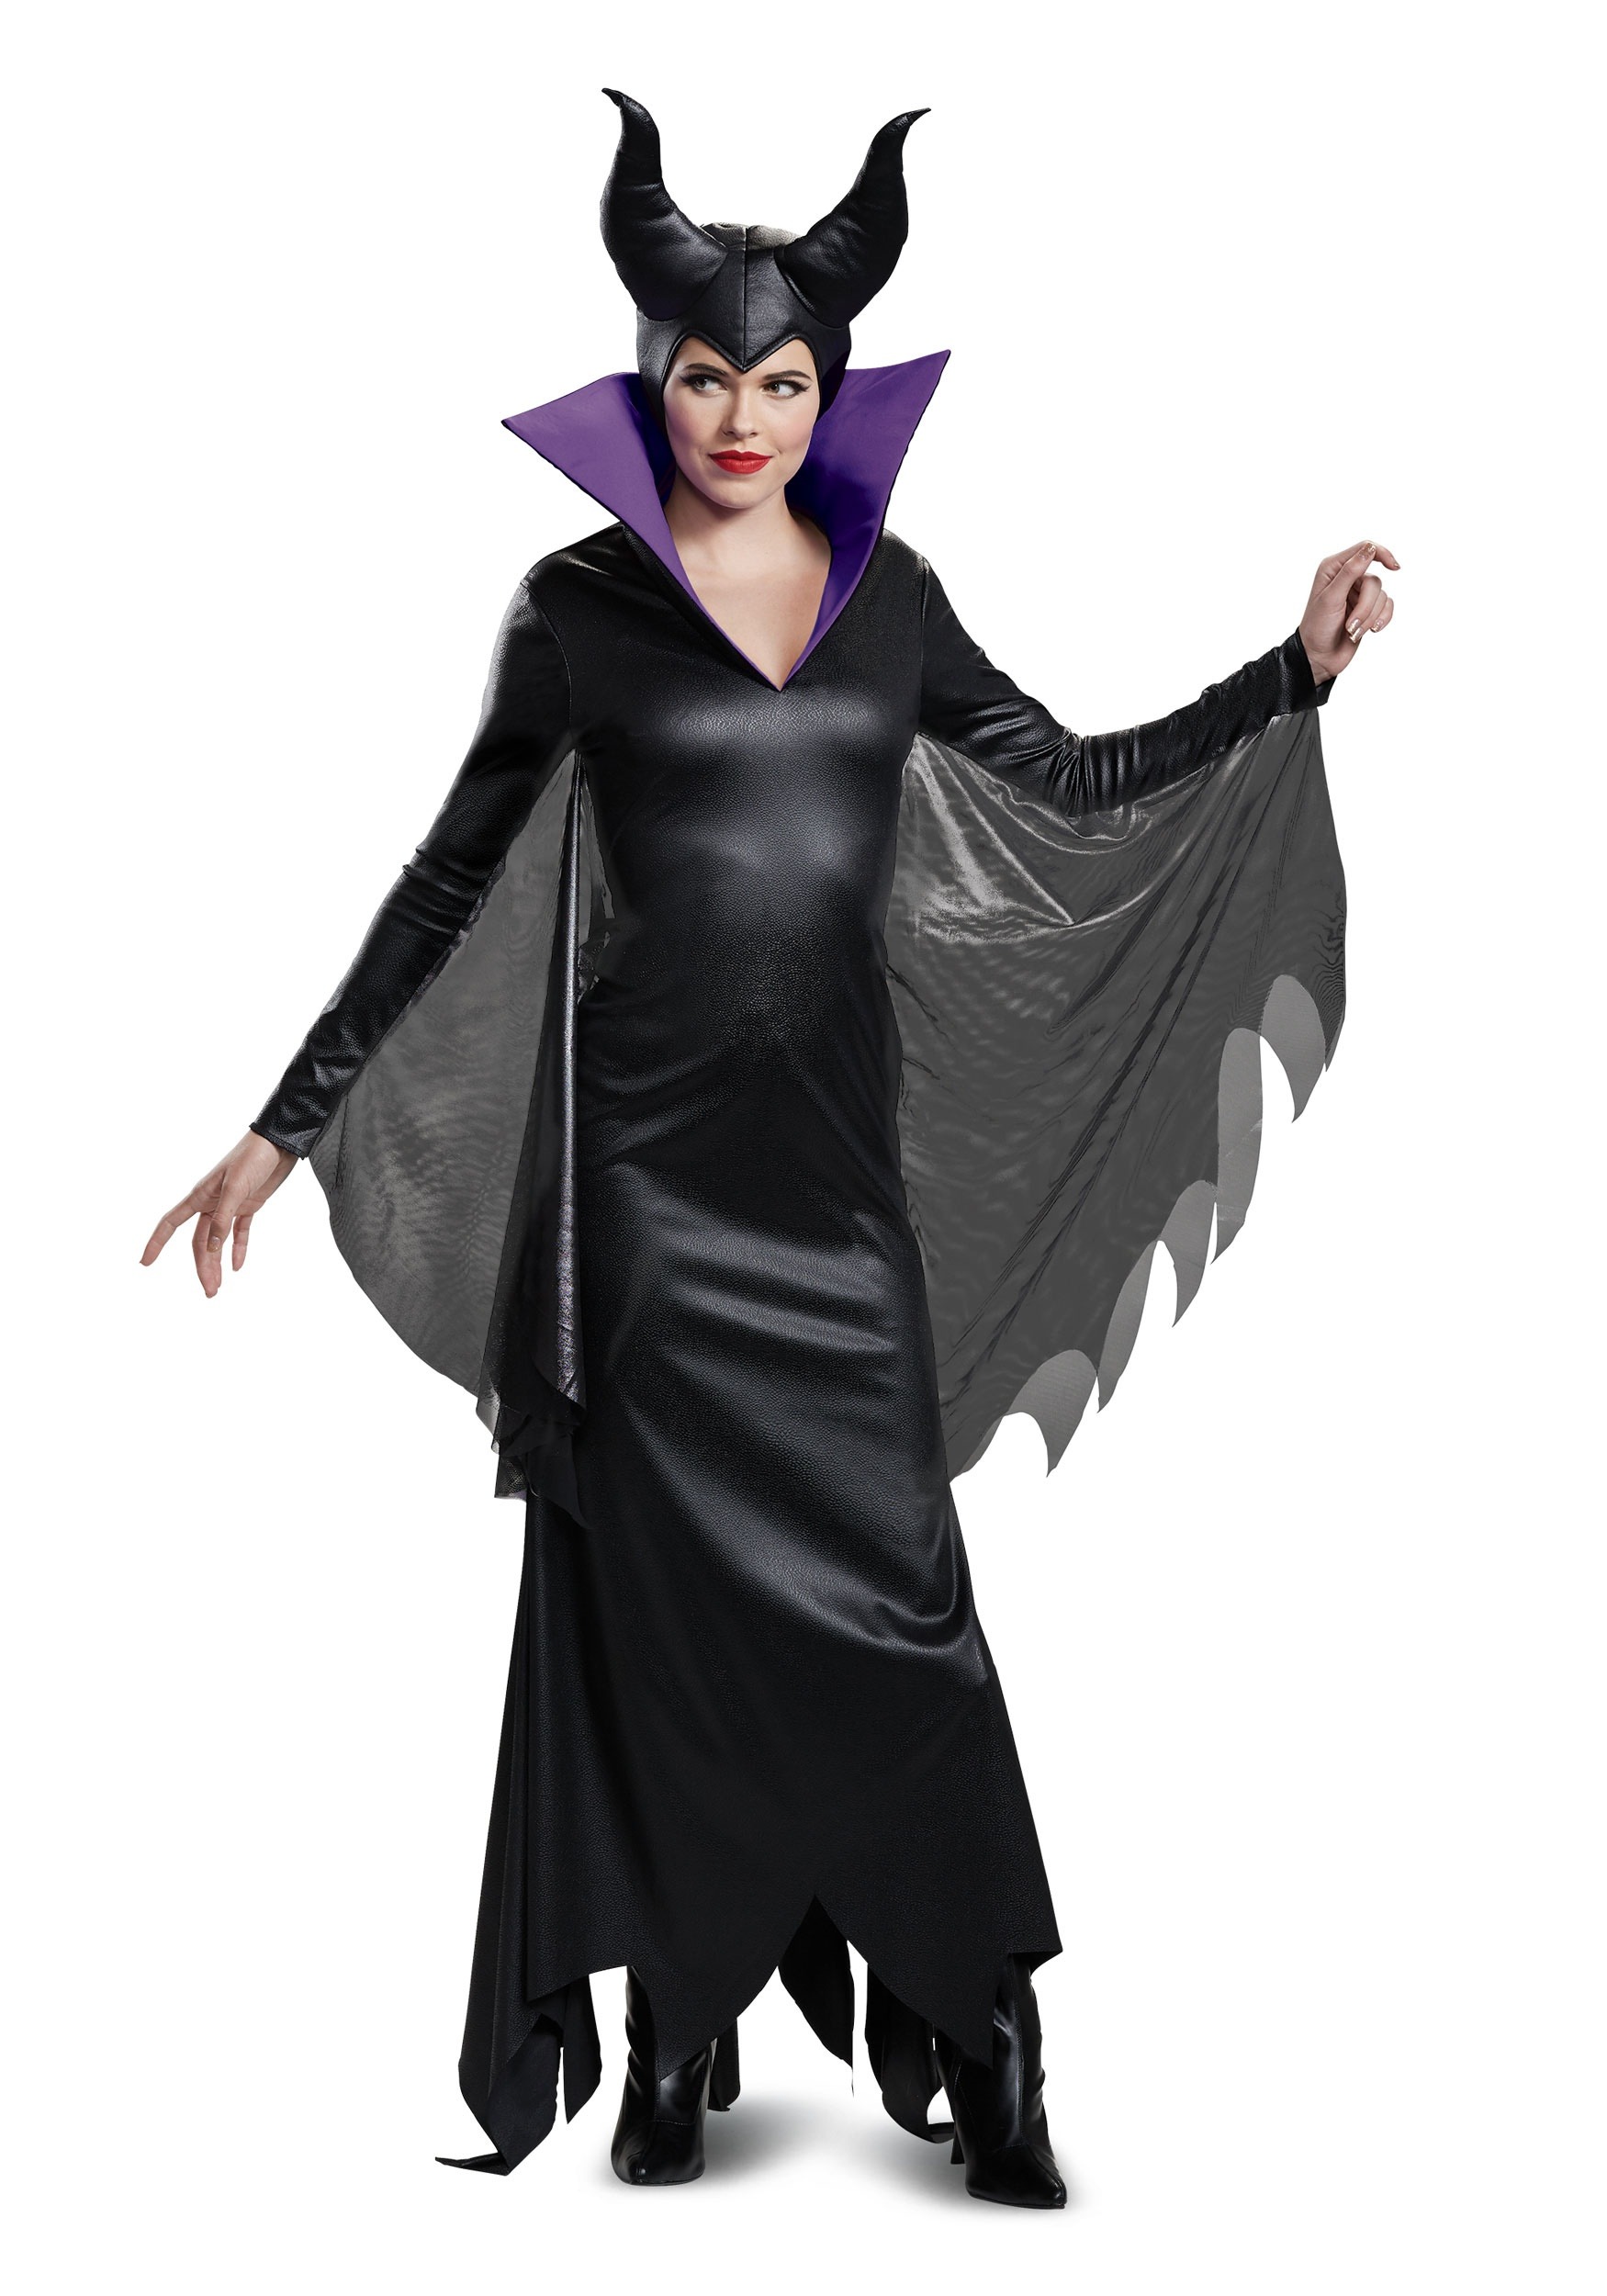 Image of Deluxe Maleficent Adult Costume ID DI67471-M